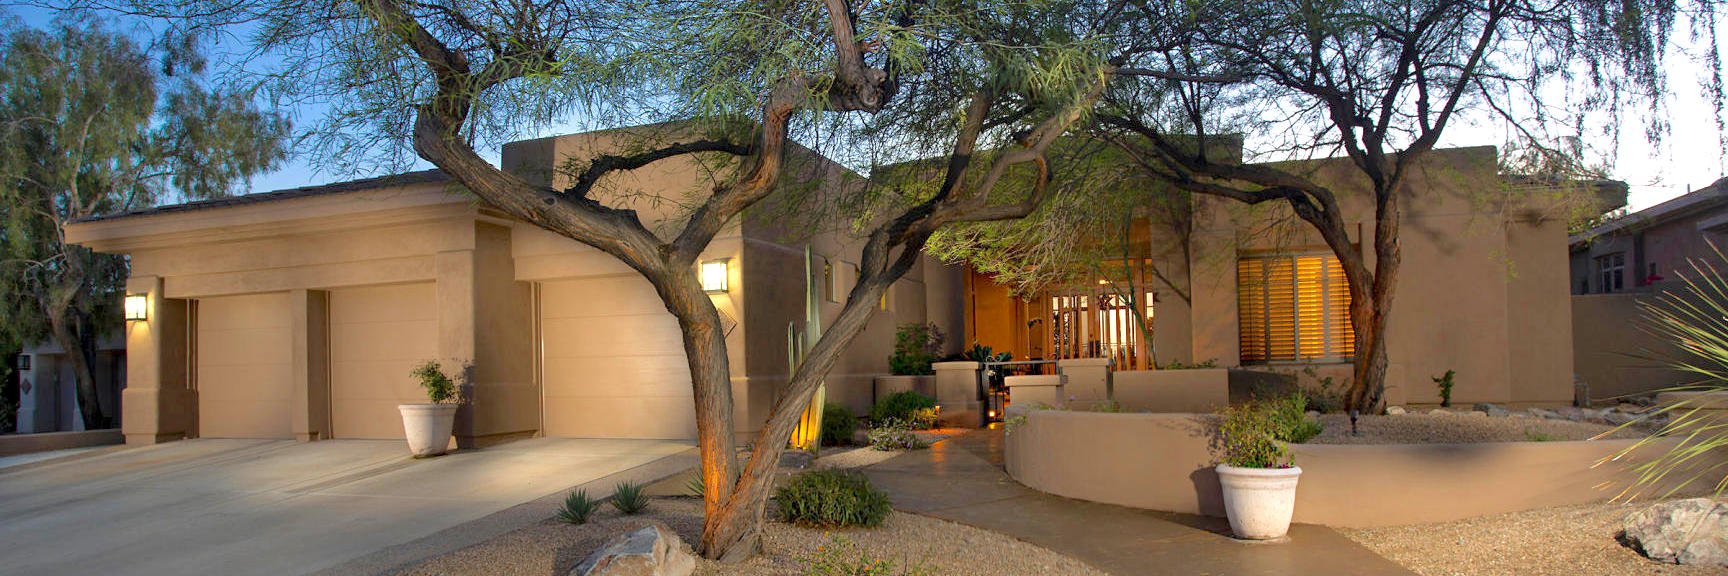 mcdowell-mountain-ranch-luxury-homes-for-sale-scottsdale-00